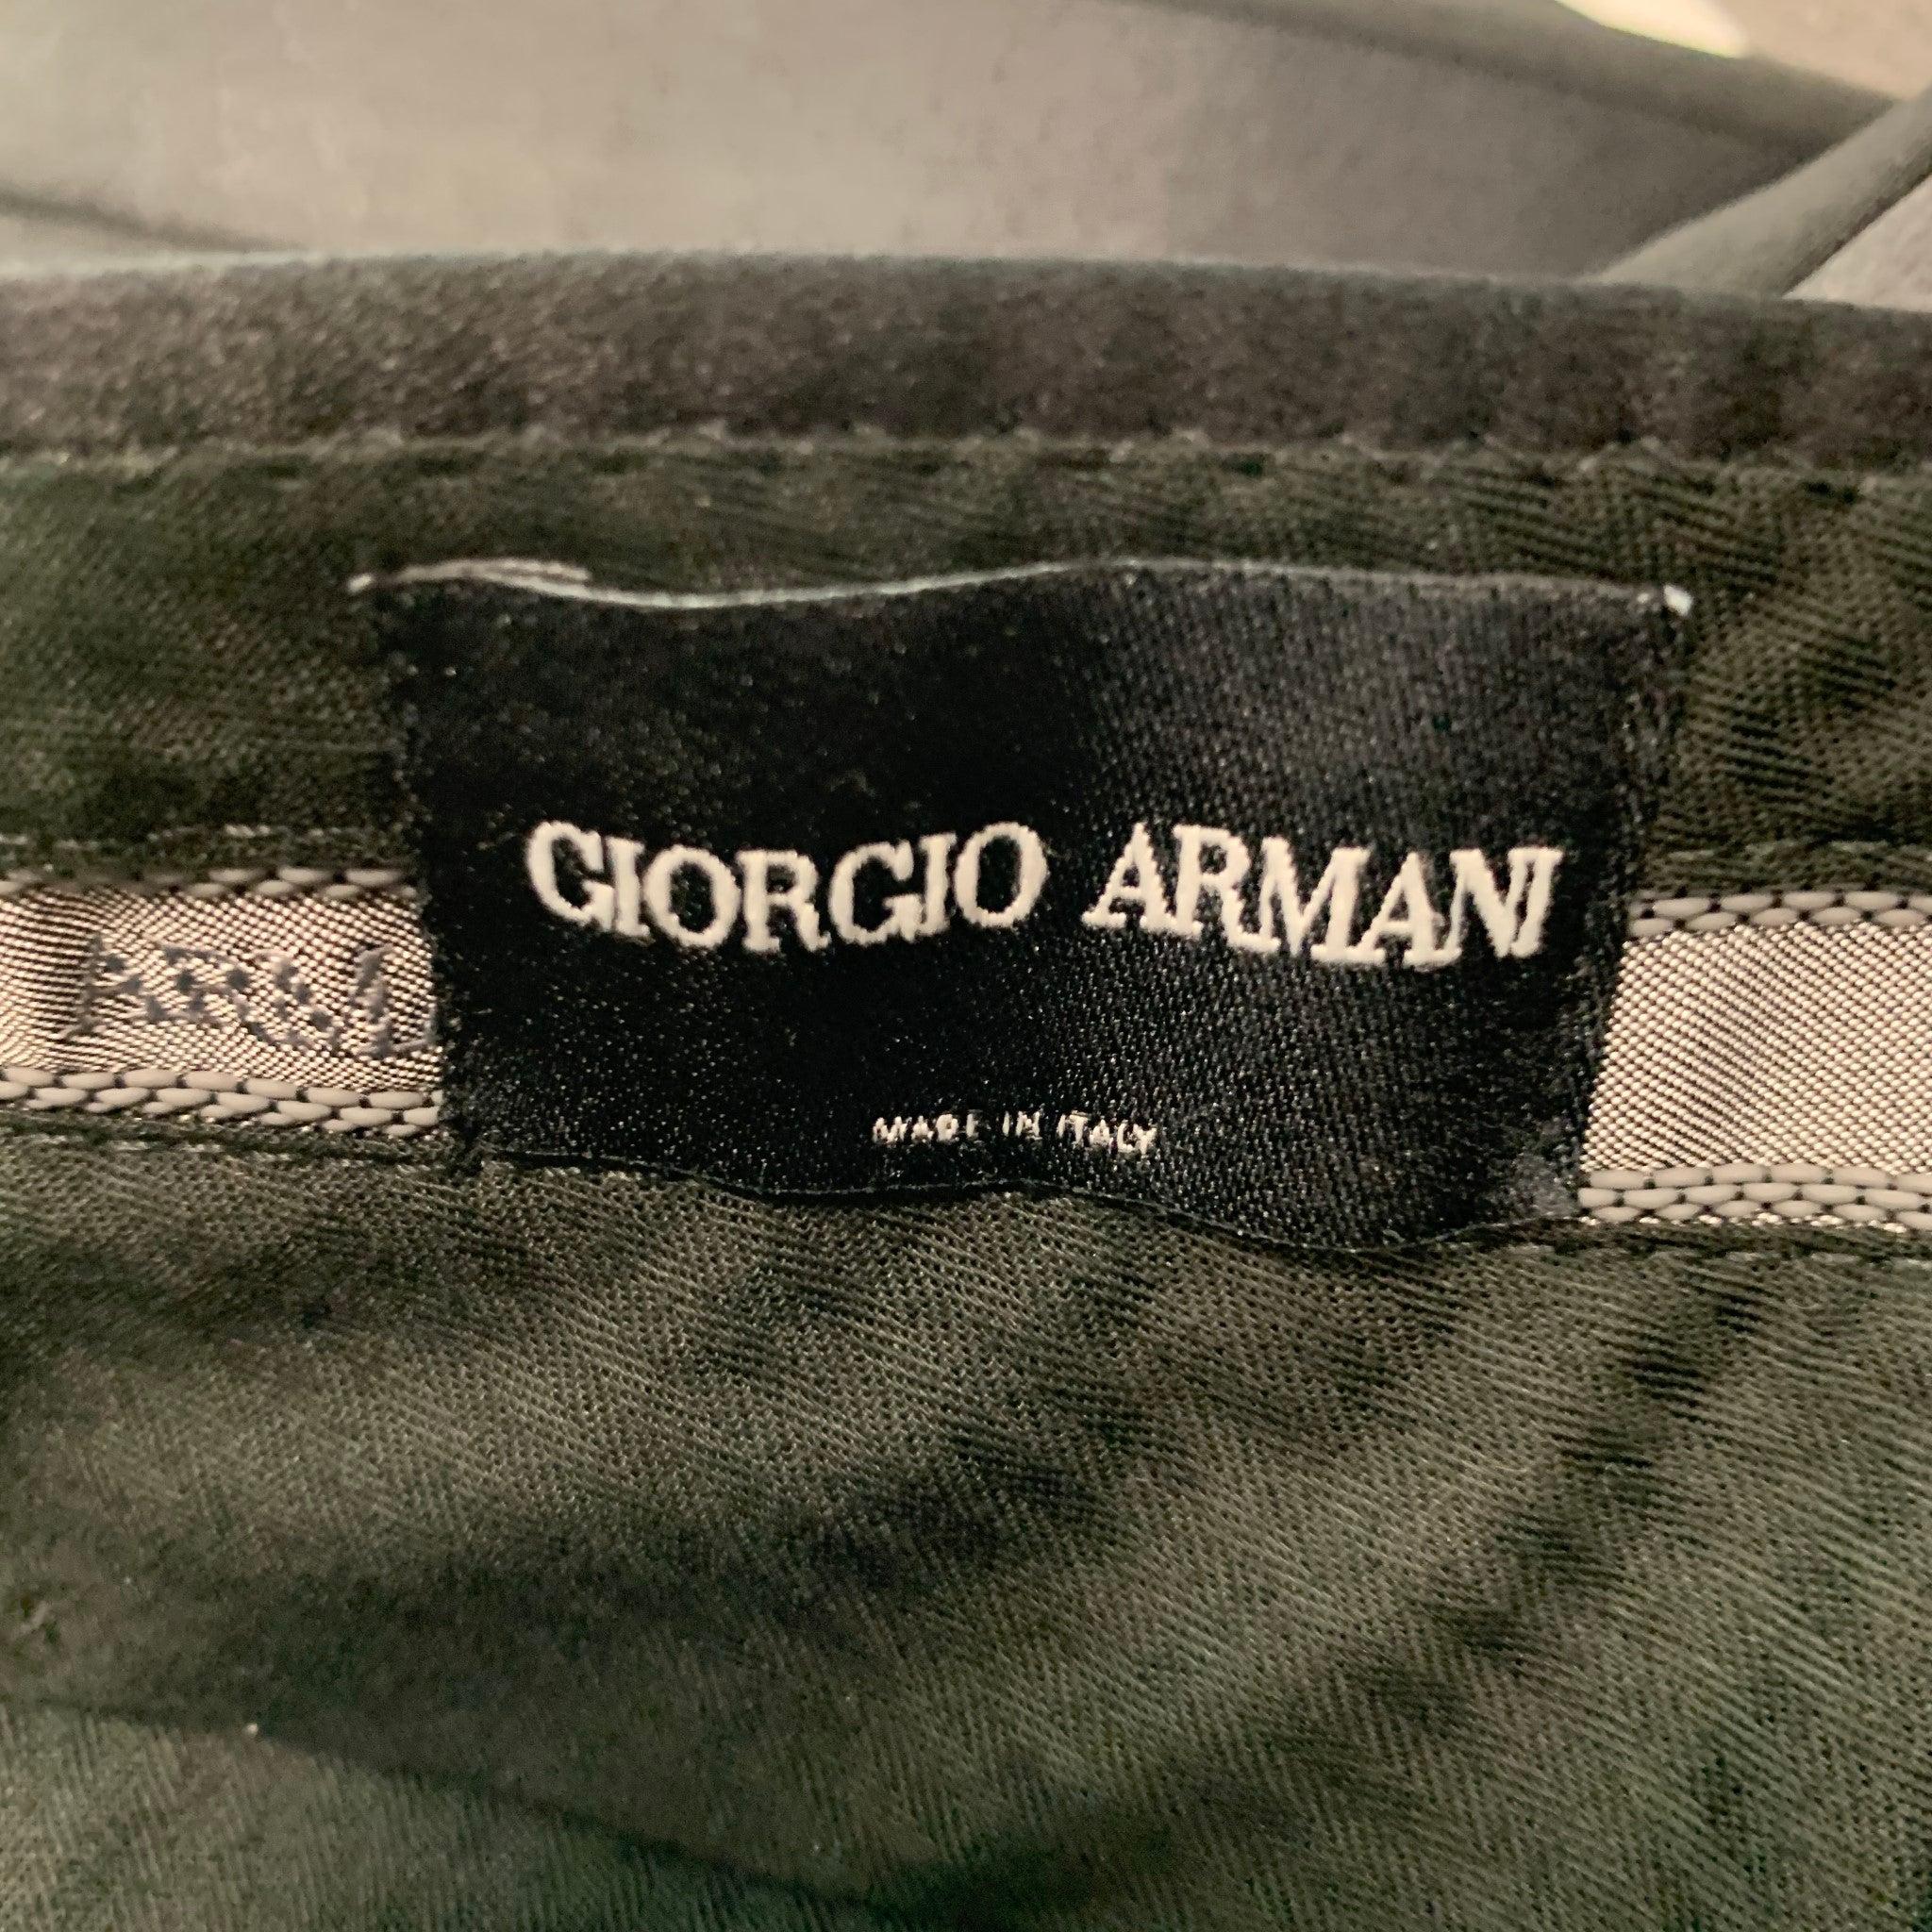 GIORGIO ARMANI Size 32 Black Wool Tuxedo Dress Pants In Excellent Condition For Sale In San Francisco, CA